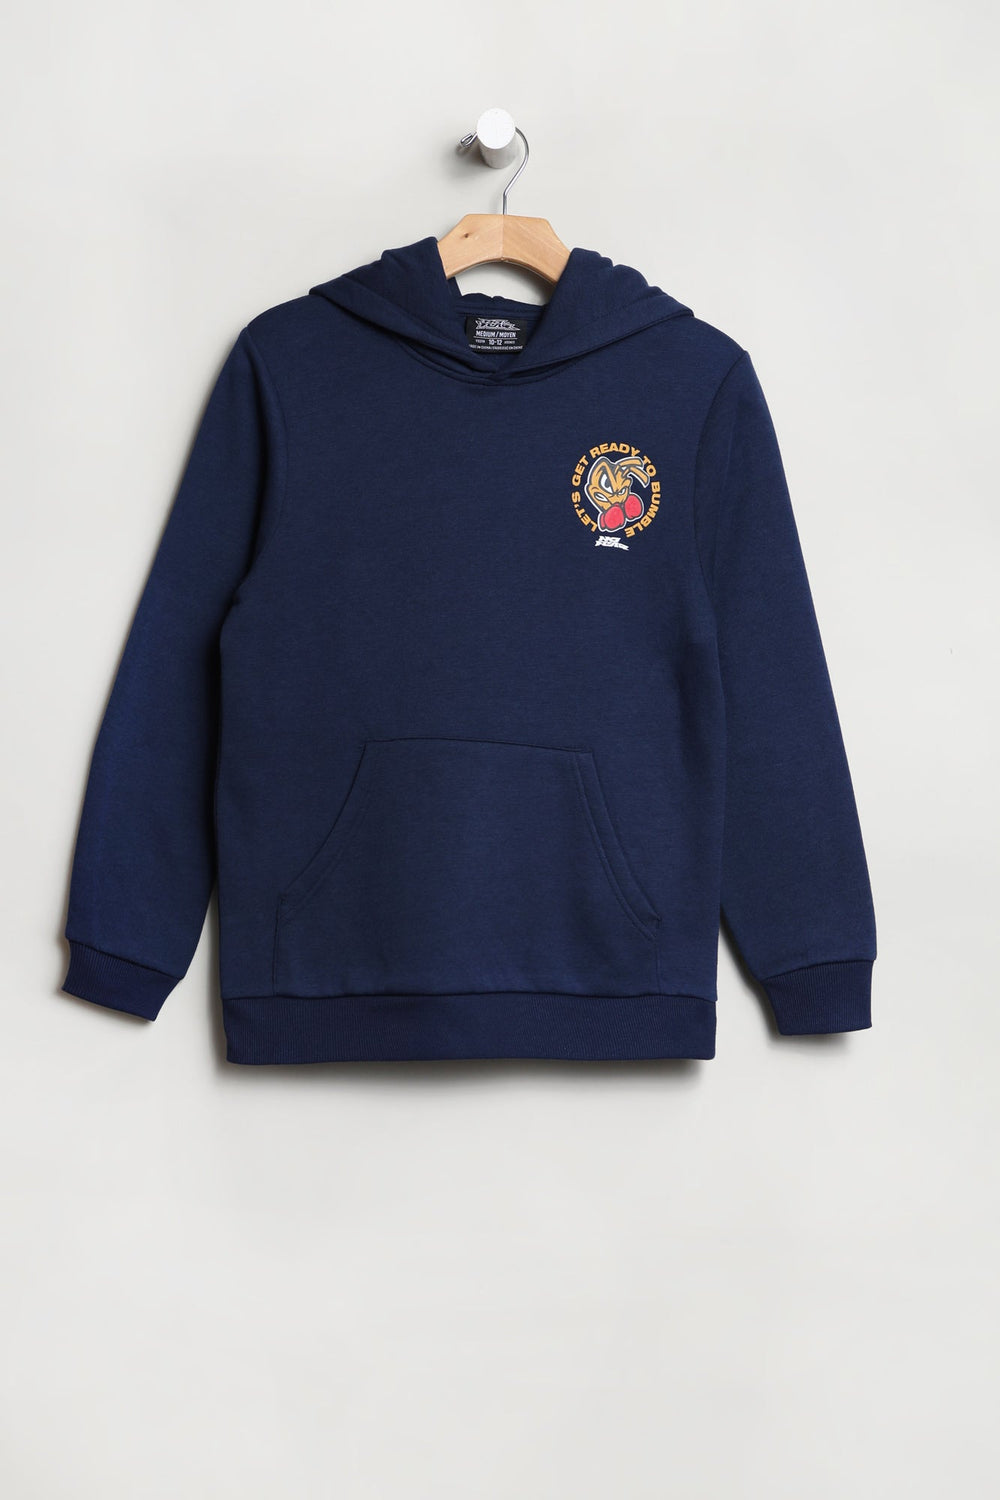 No Fear Youth Ready to Bumble Hoodie Navy